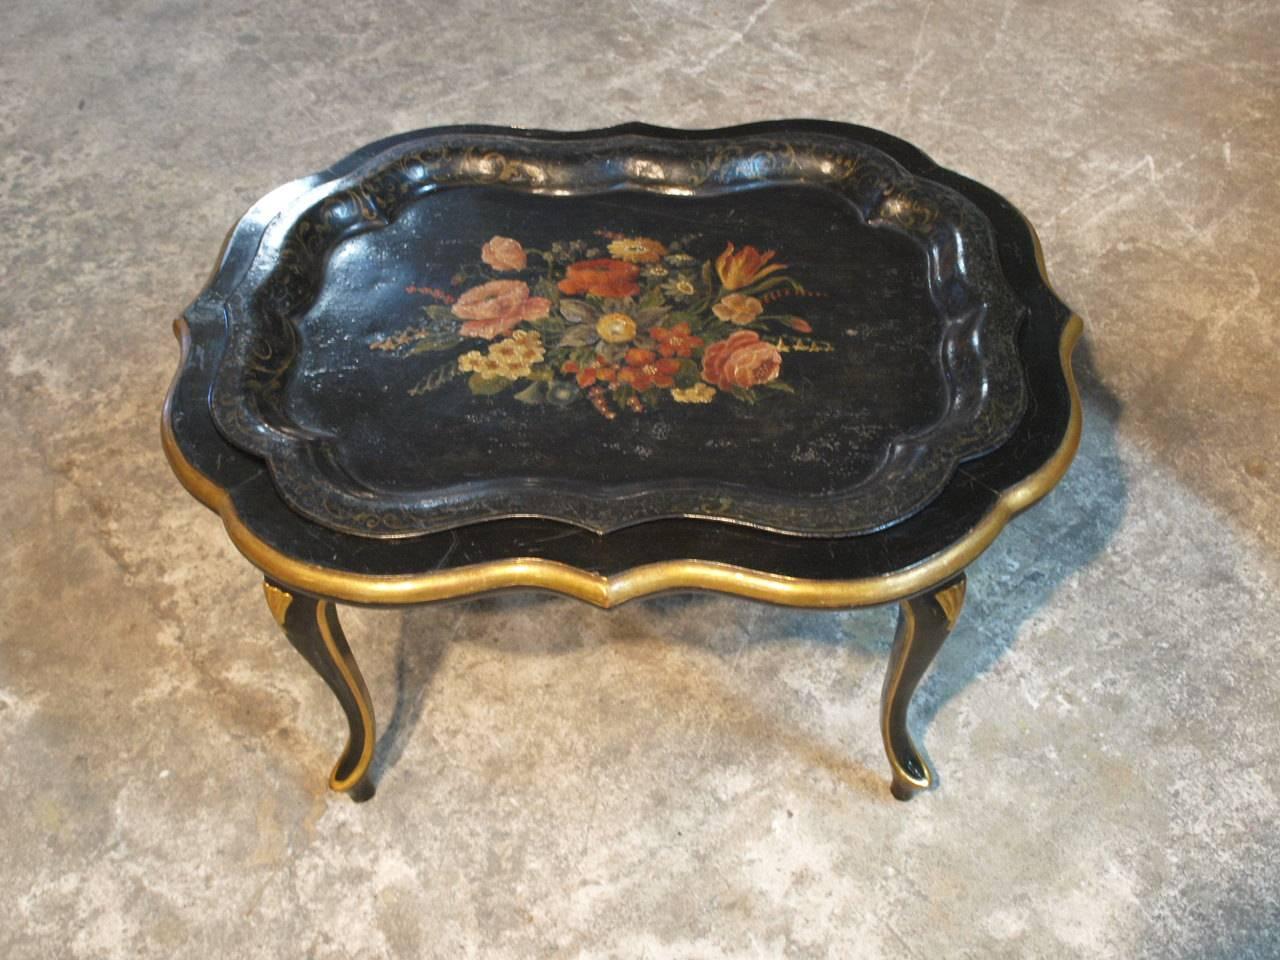 A very charming early 20th century chinoiserie coffee table from Spain. Beautifully constructed in lacquered wood and gold gilt. The tole tray is removable. The tole tray (possibly earlier) is hand-painted with a lovely floral arrangement.